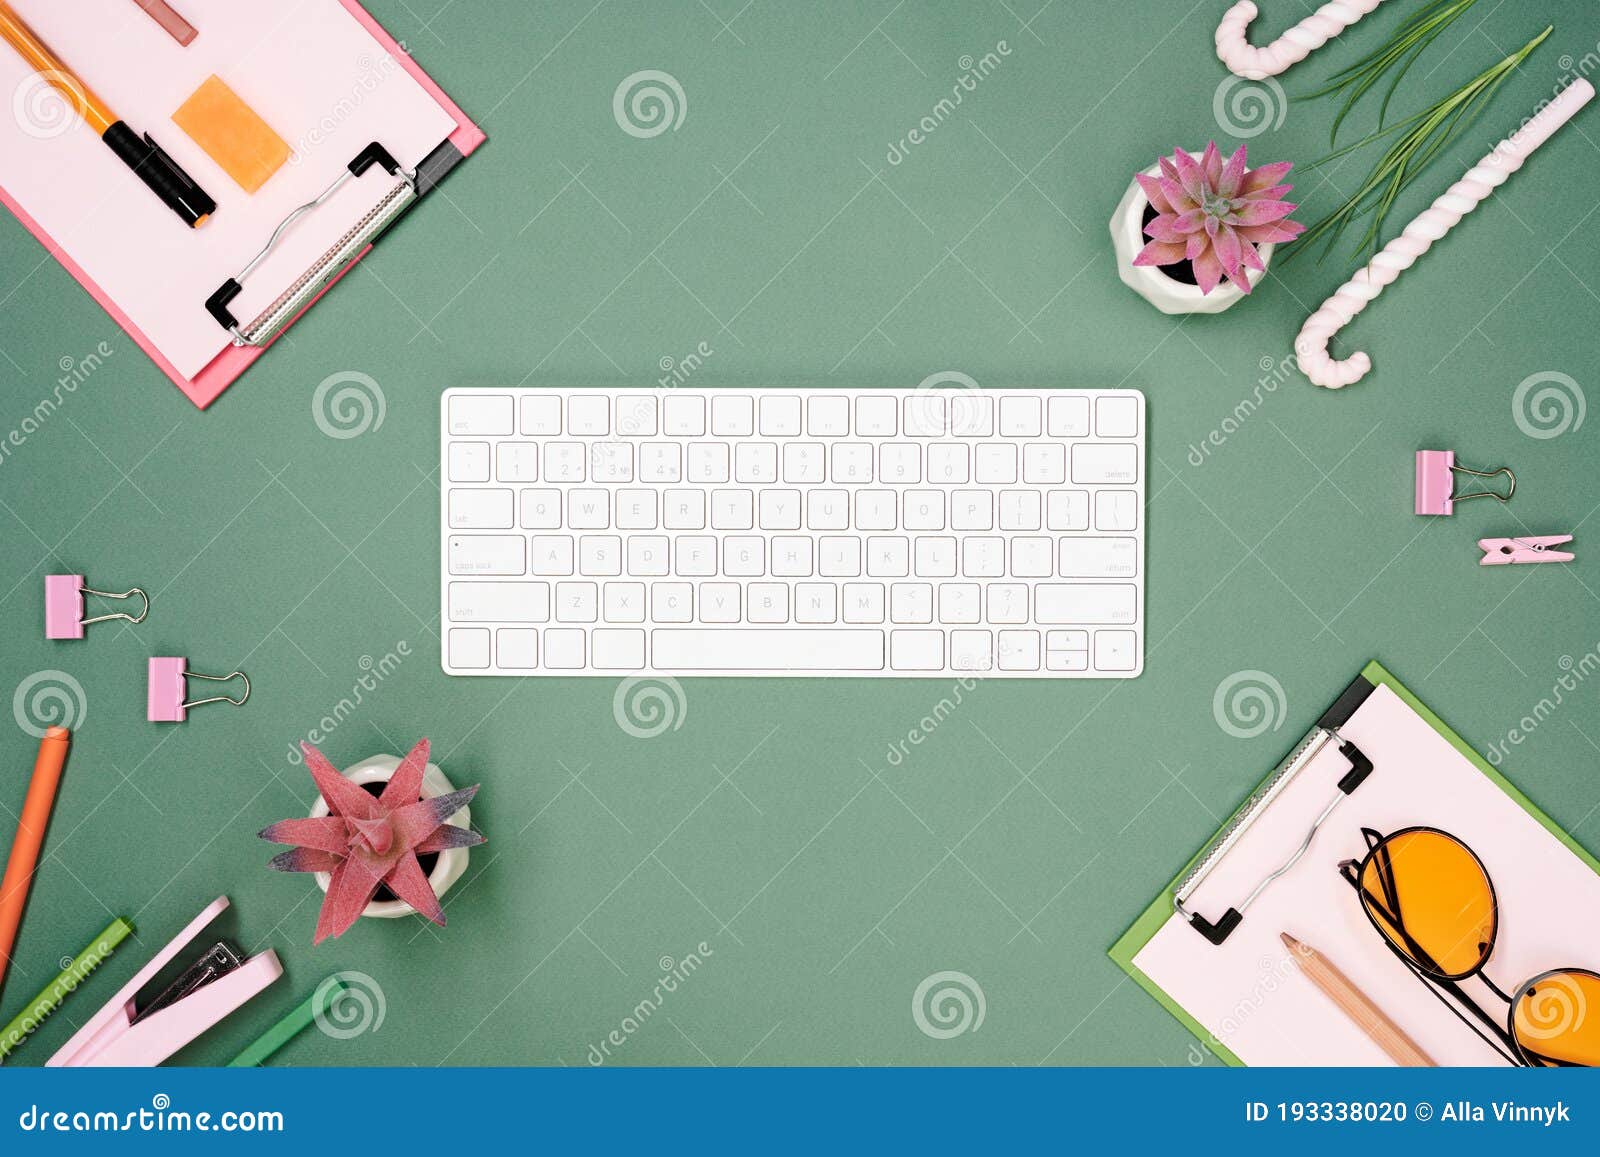 workspace mockup for two with clipboards, keyboard